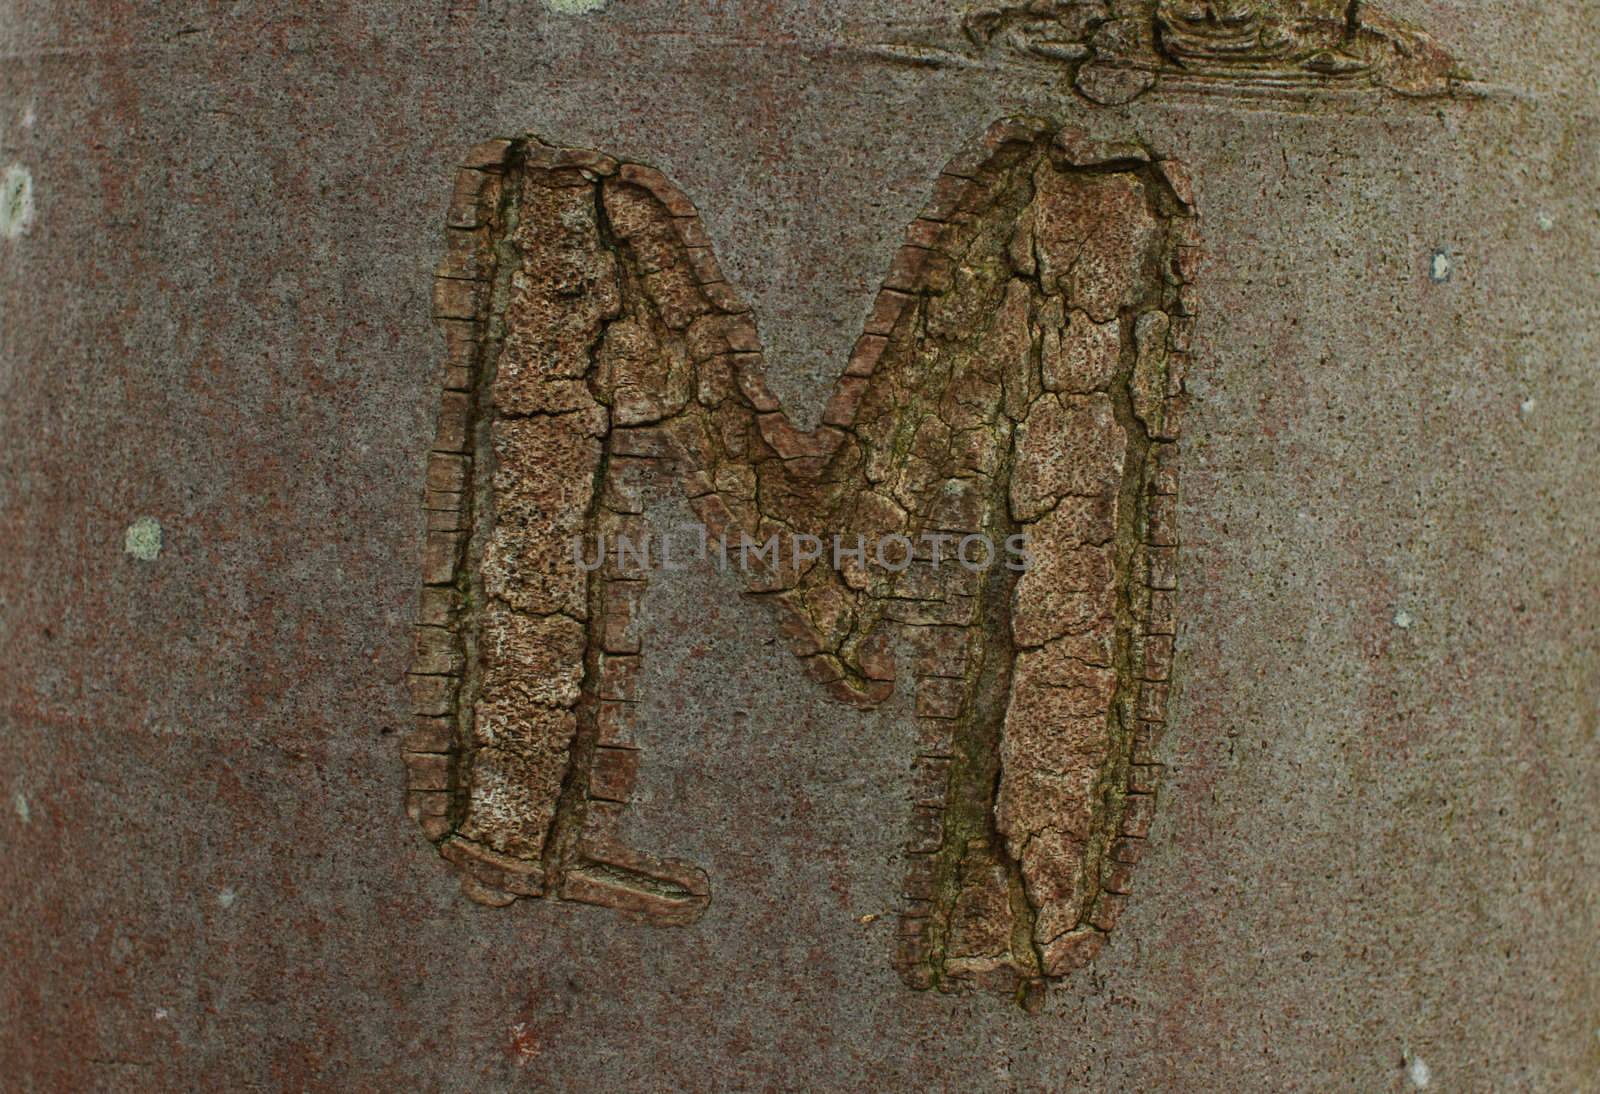 letter "M" cut  long time ago on the tree steam